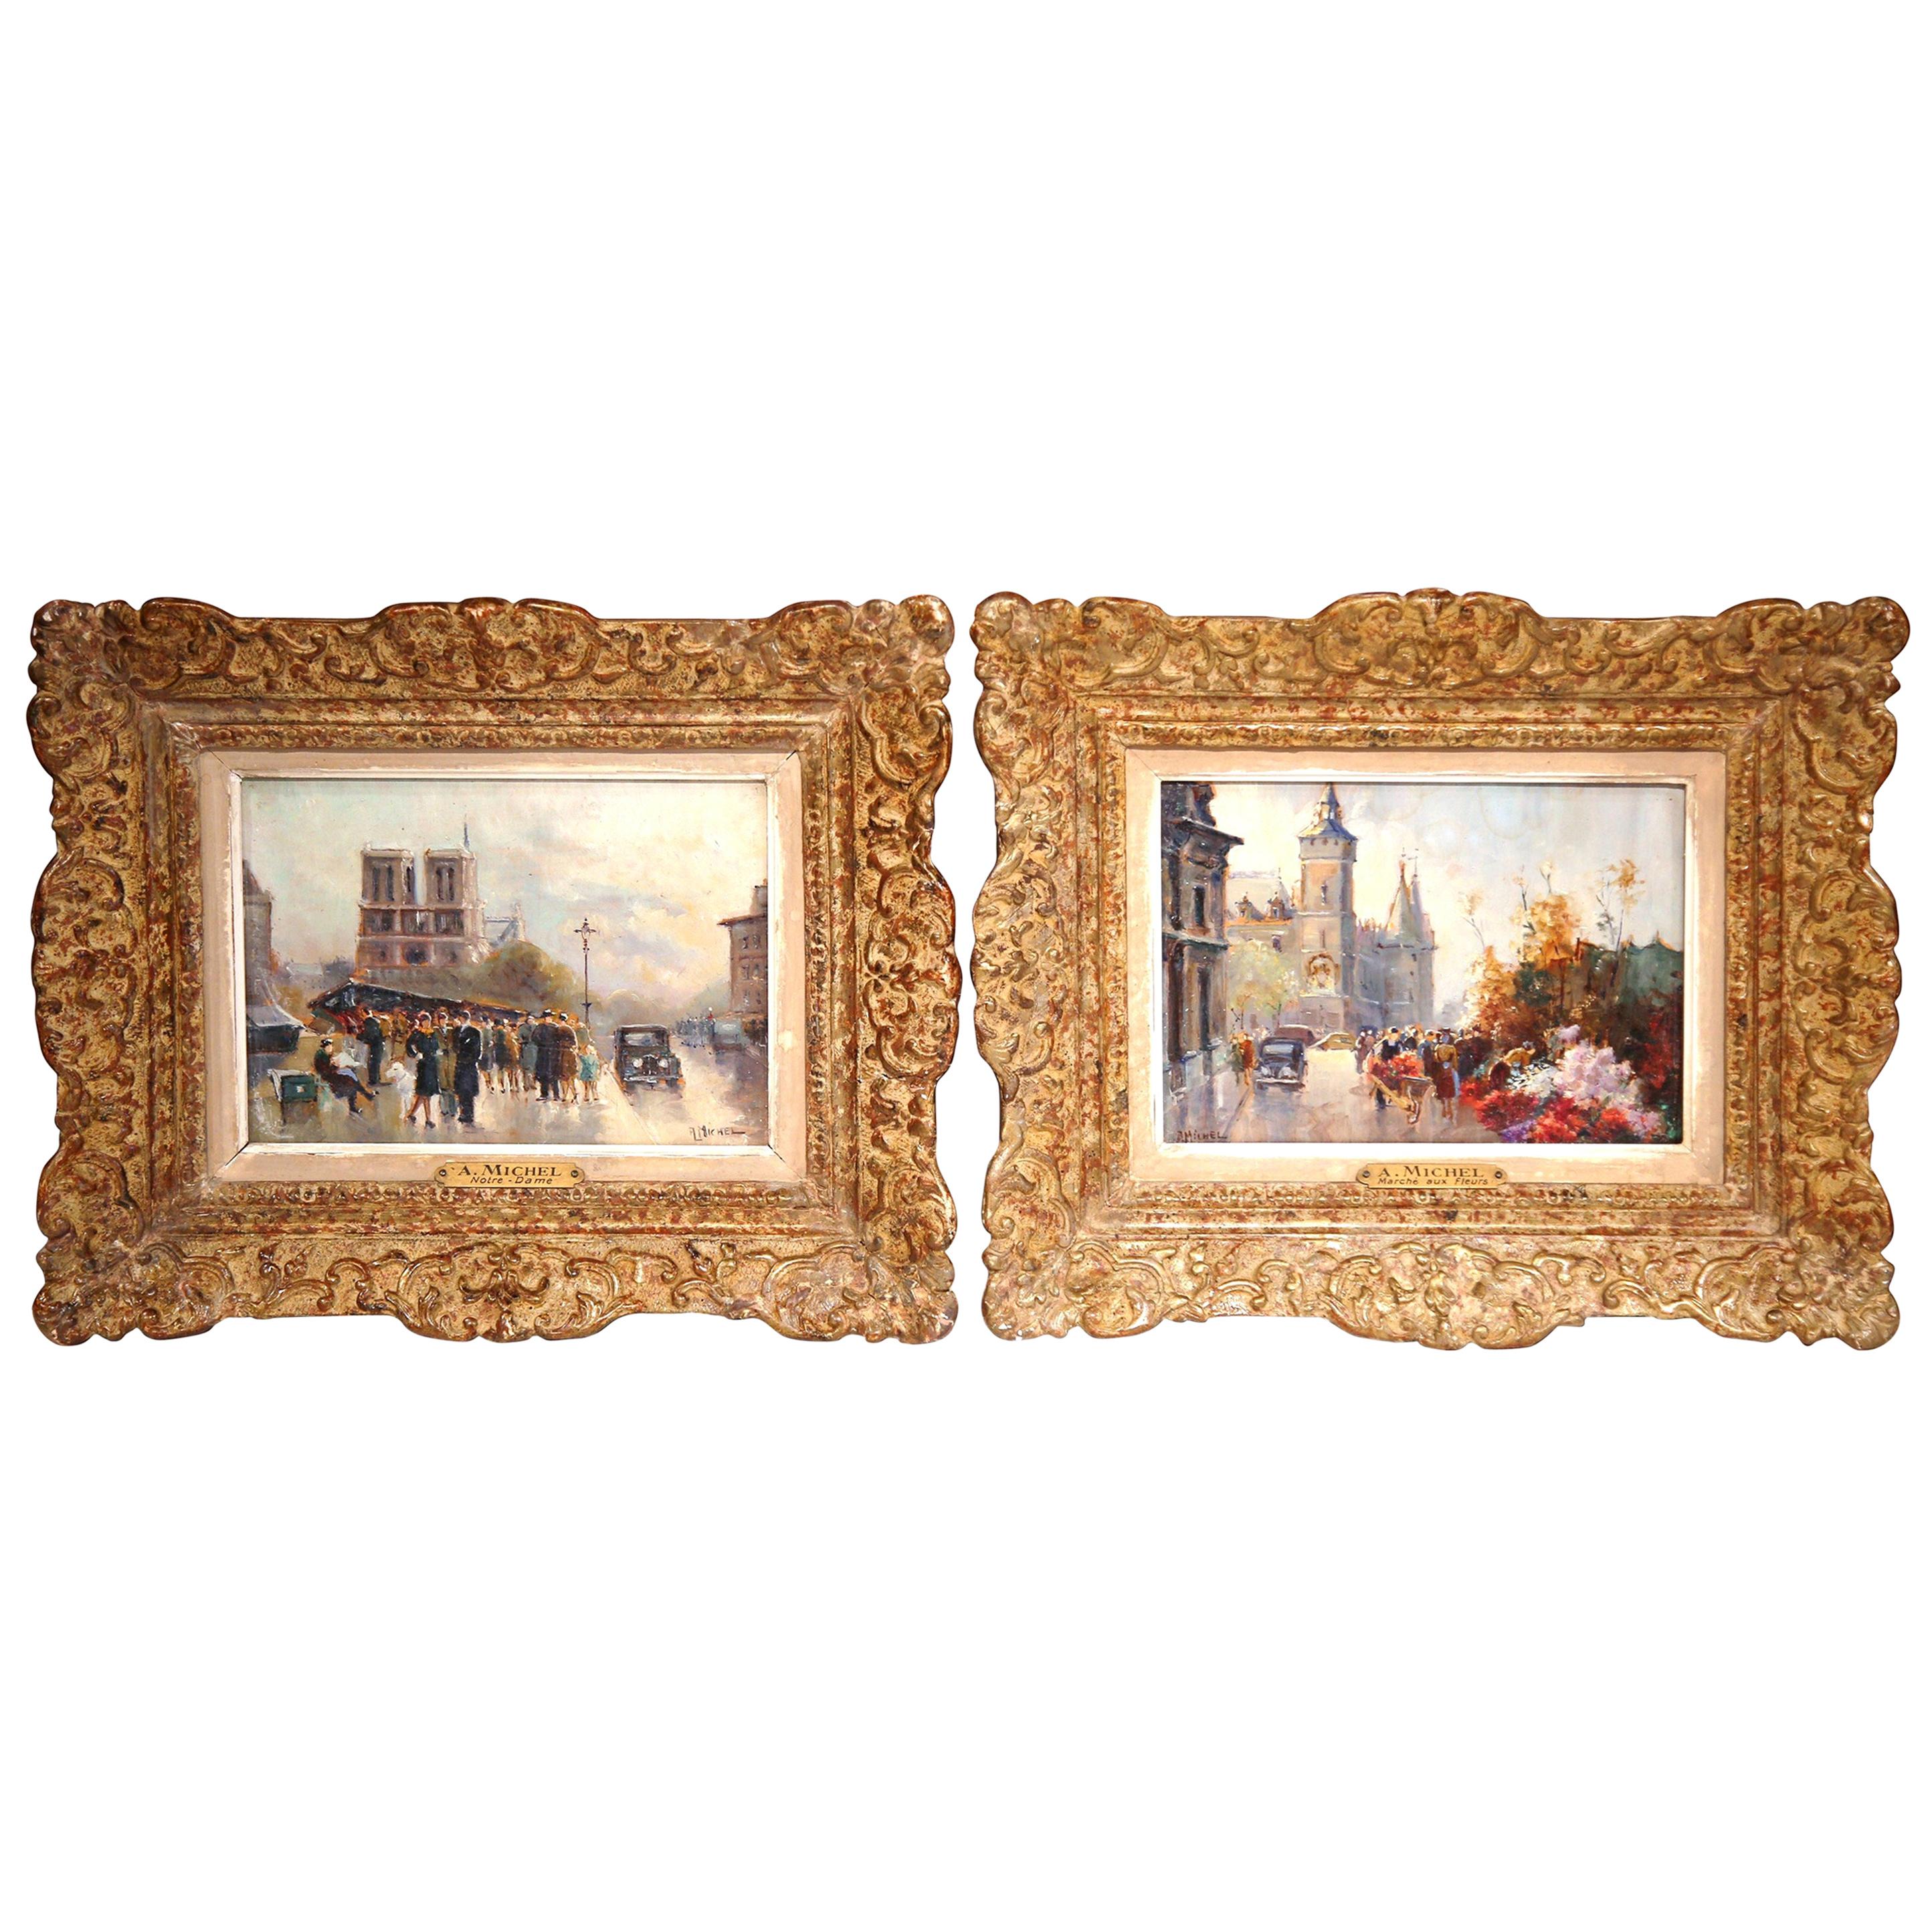 Pair of Mid-20th Century French Paris Scenes Paintings Signed A. Michel